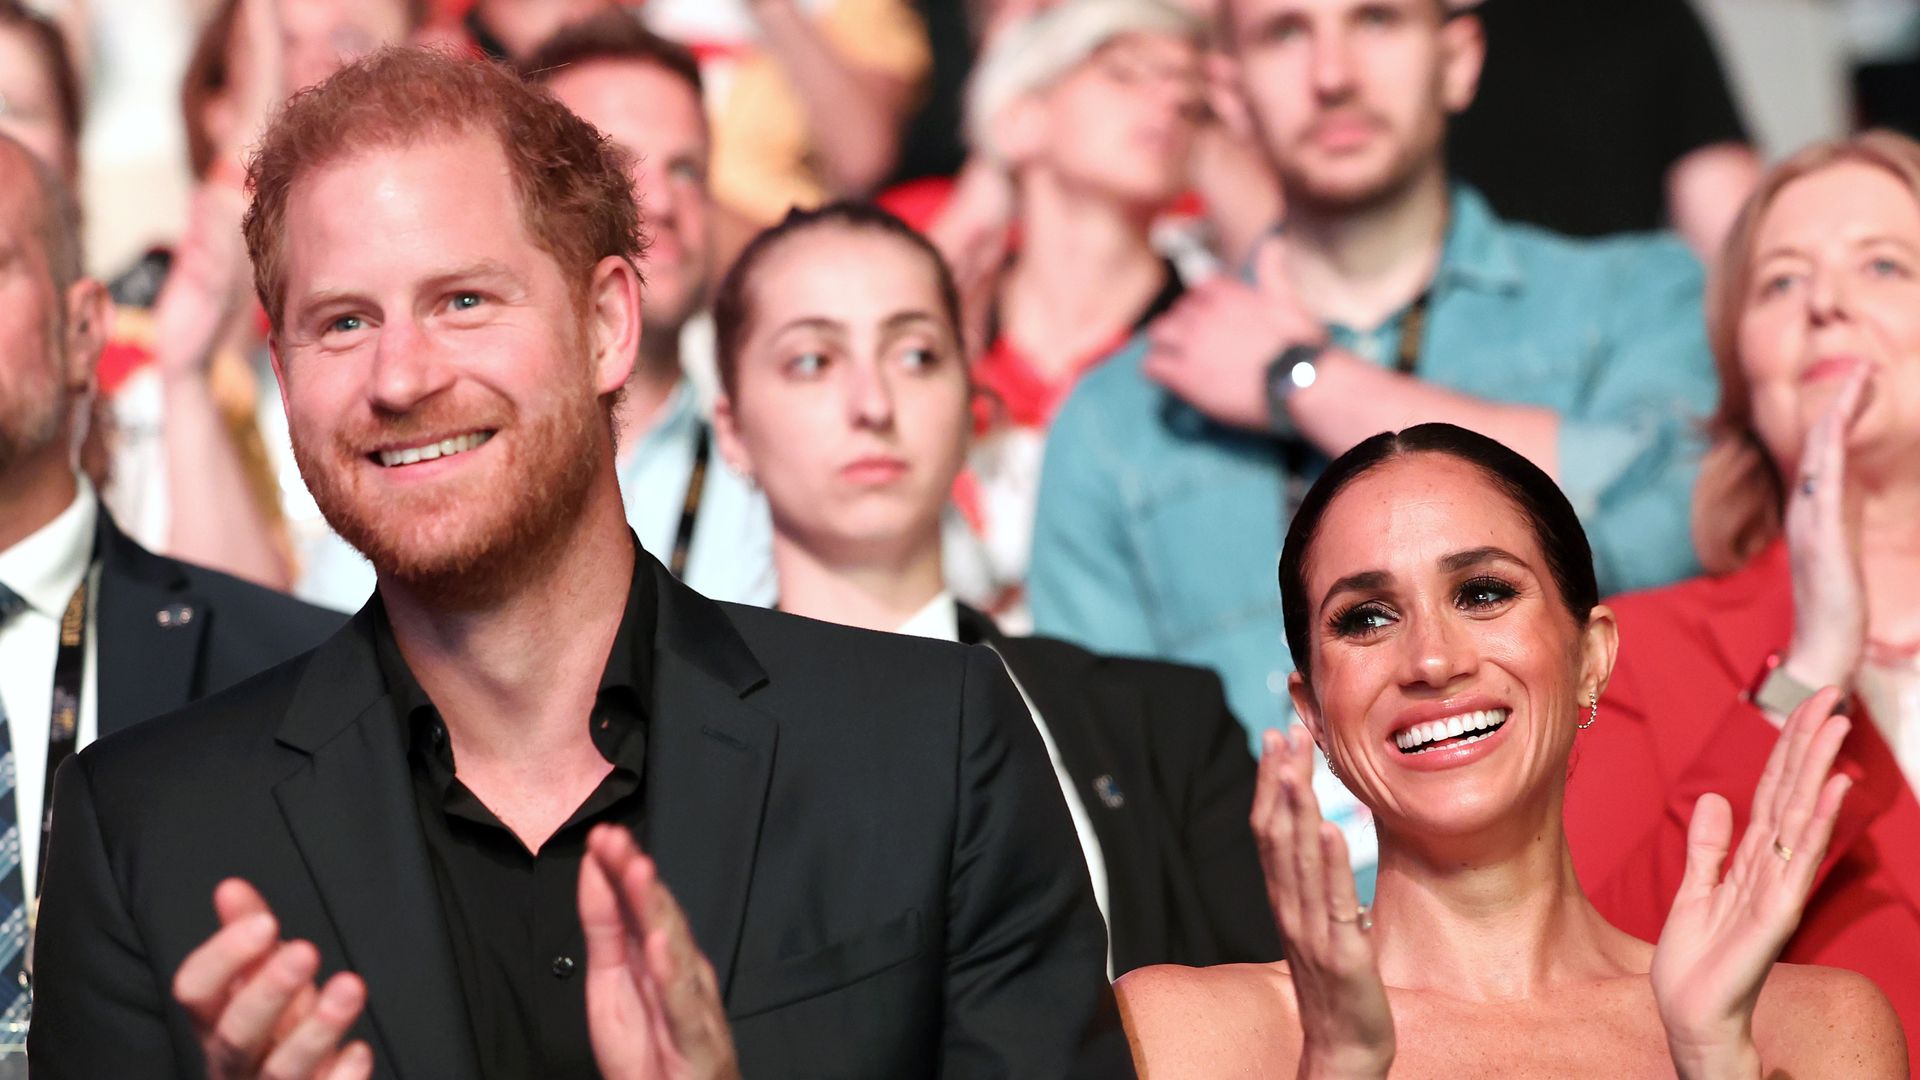 Prince Harry and Meghan Markle clapping hands